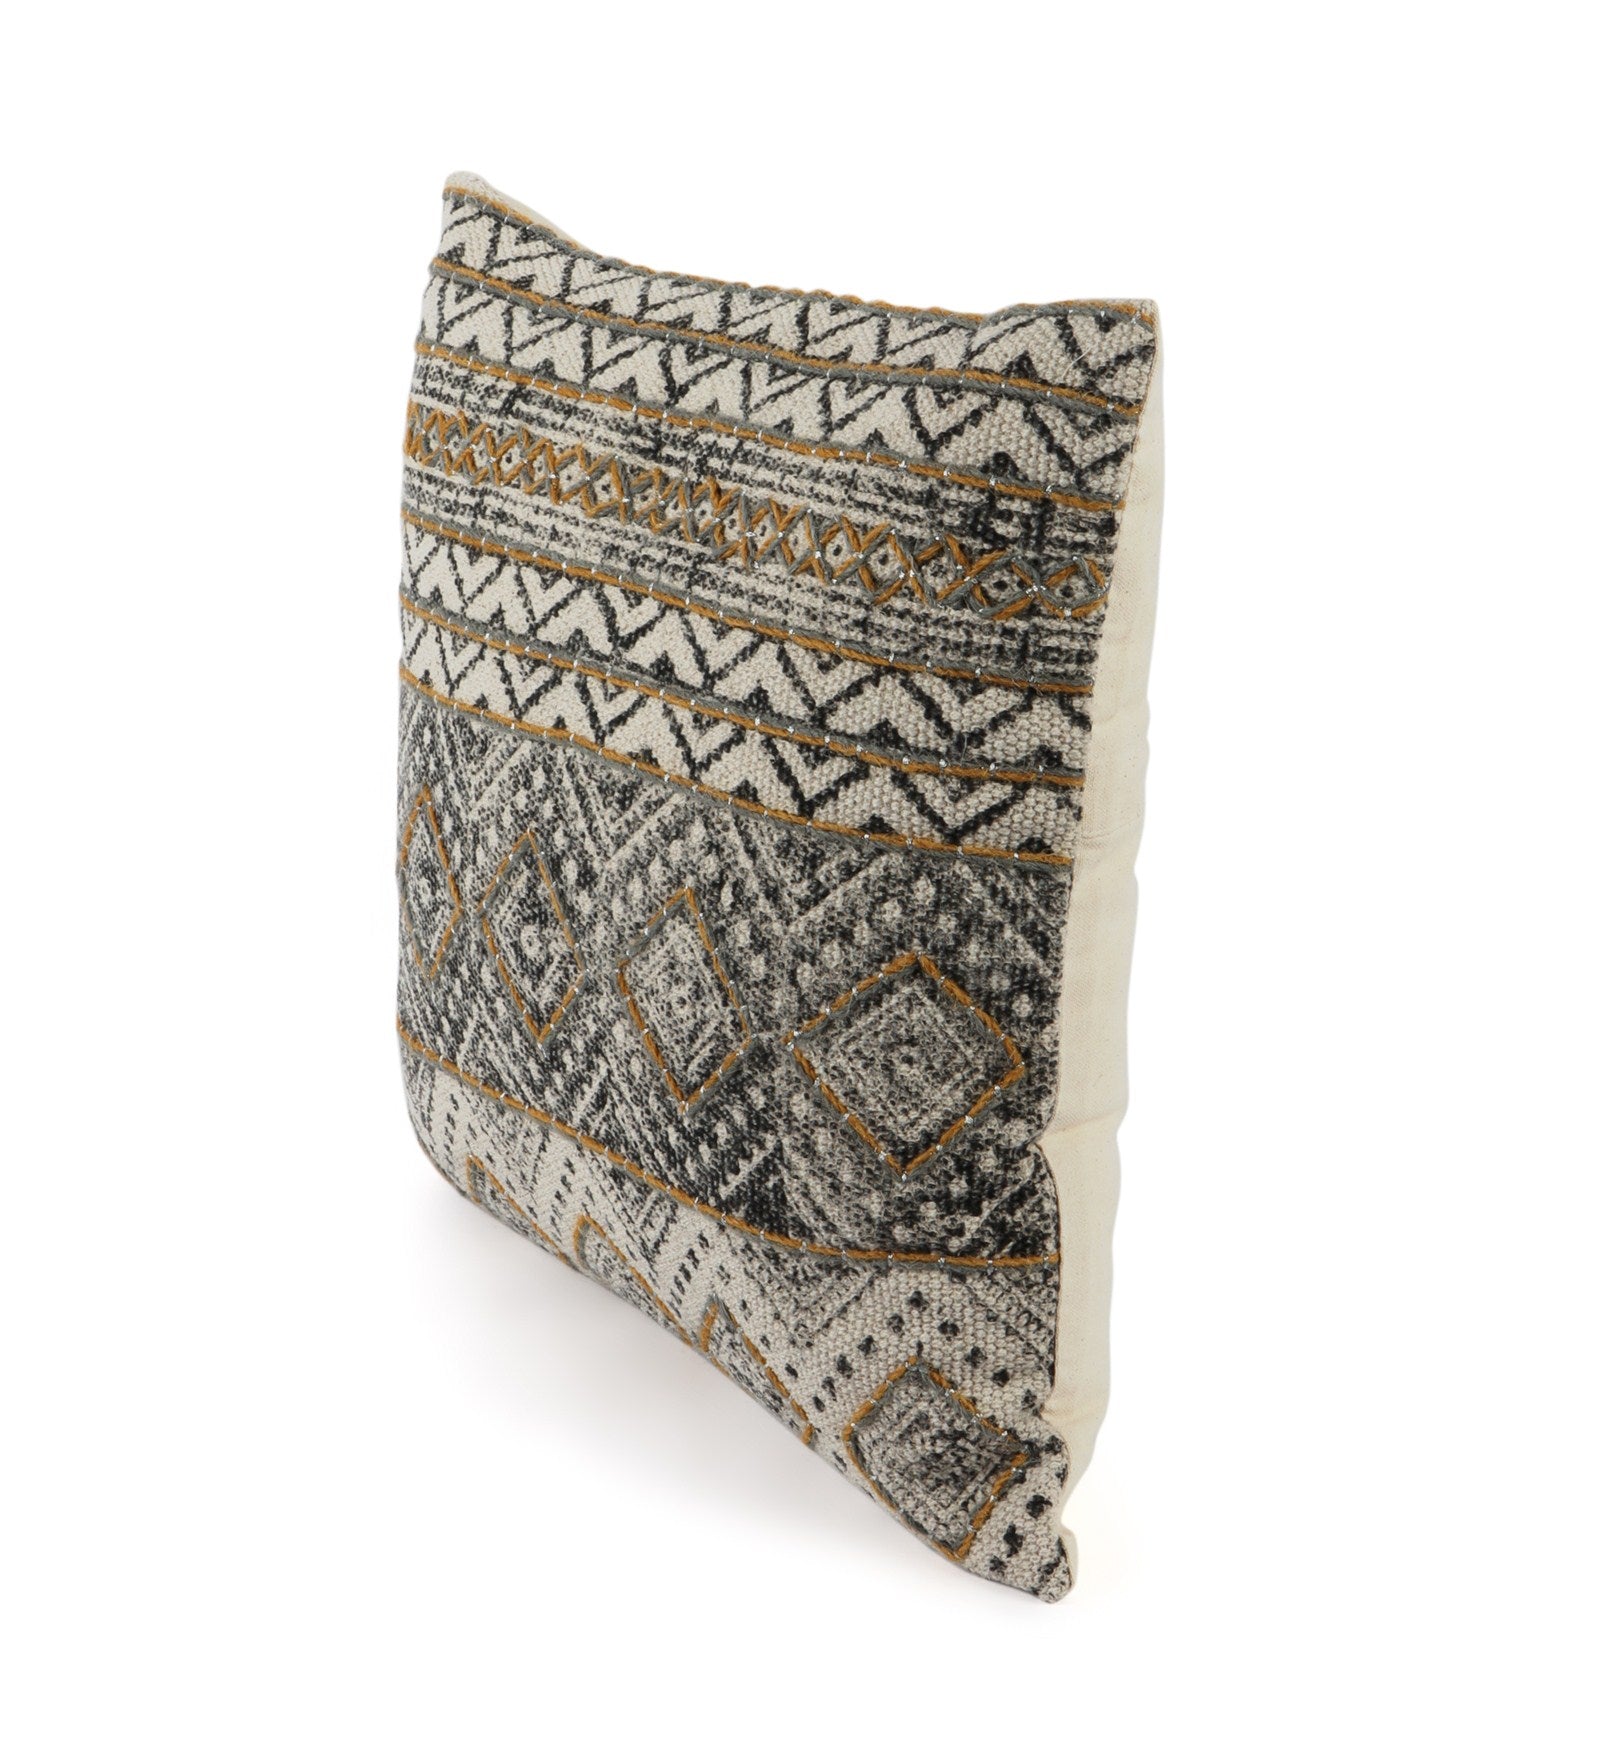 Embroidered Contemporary Cushion Cover (Black-Beige Geometric)